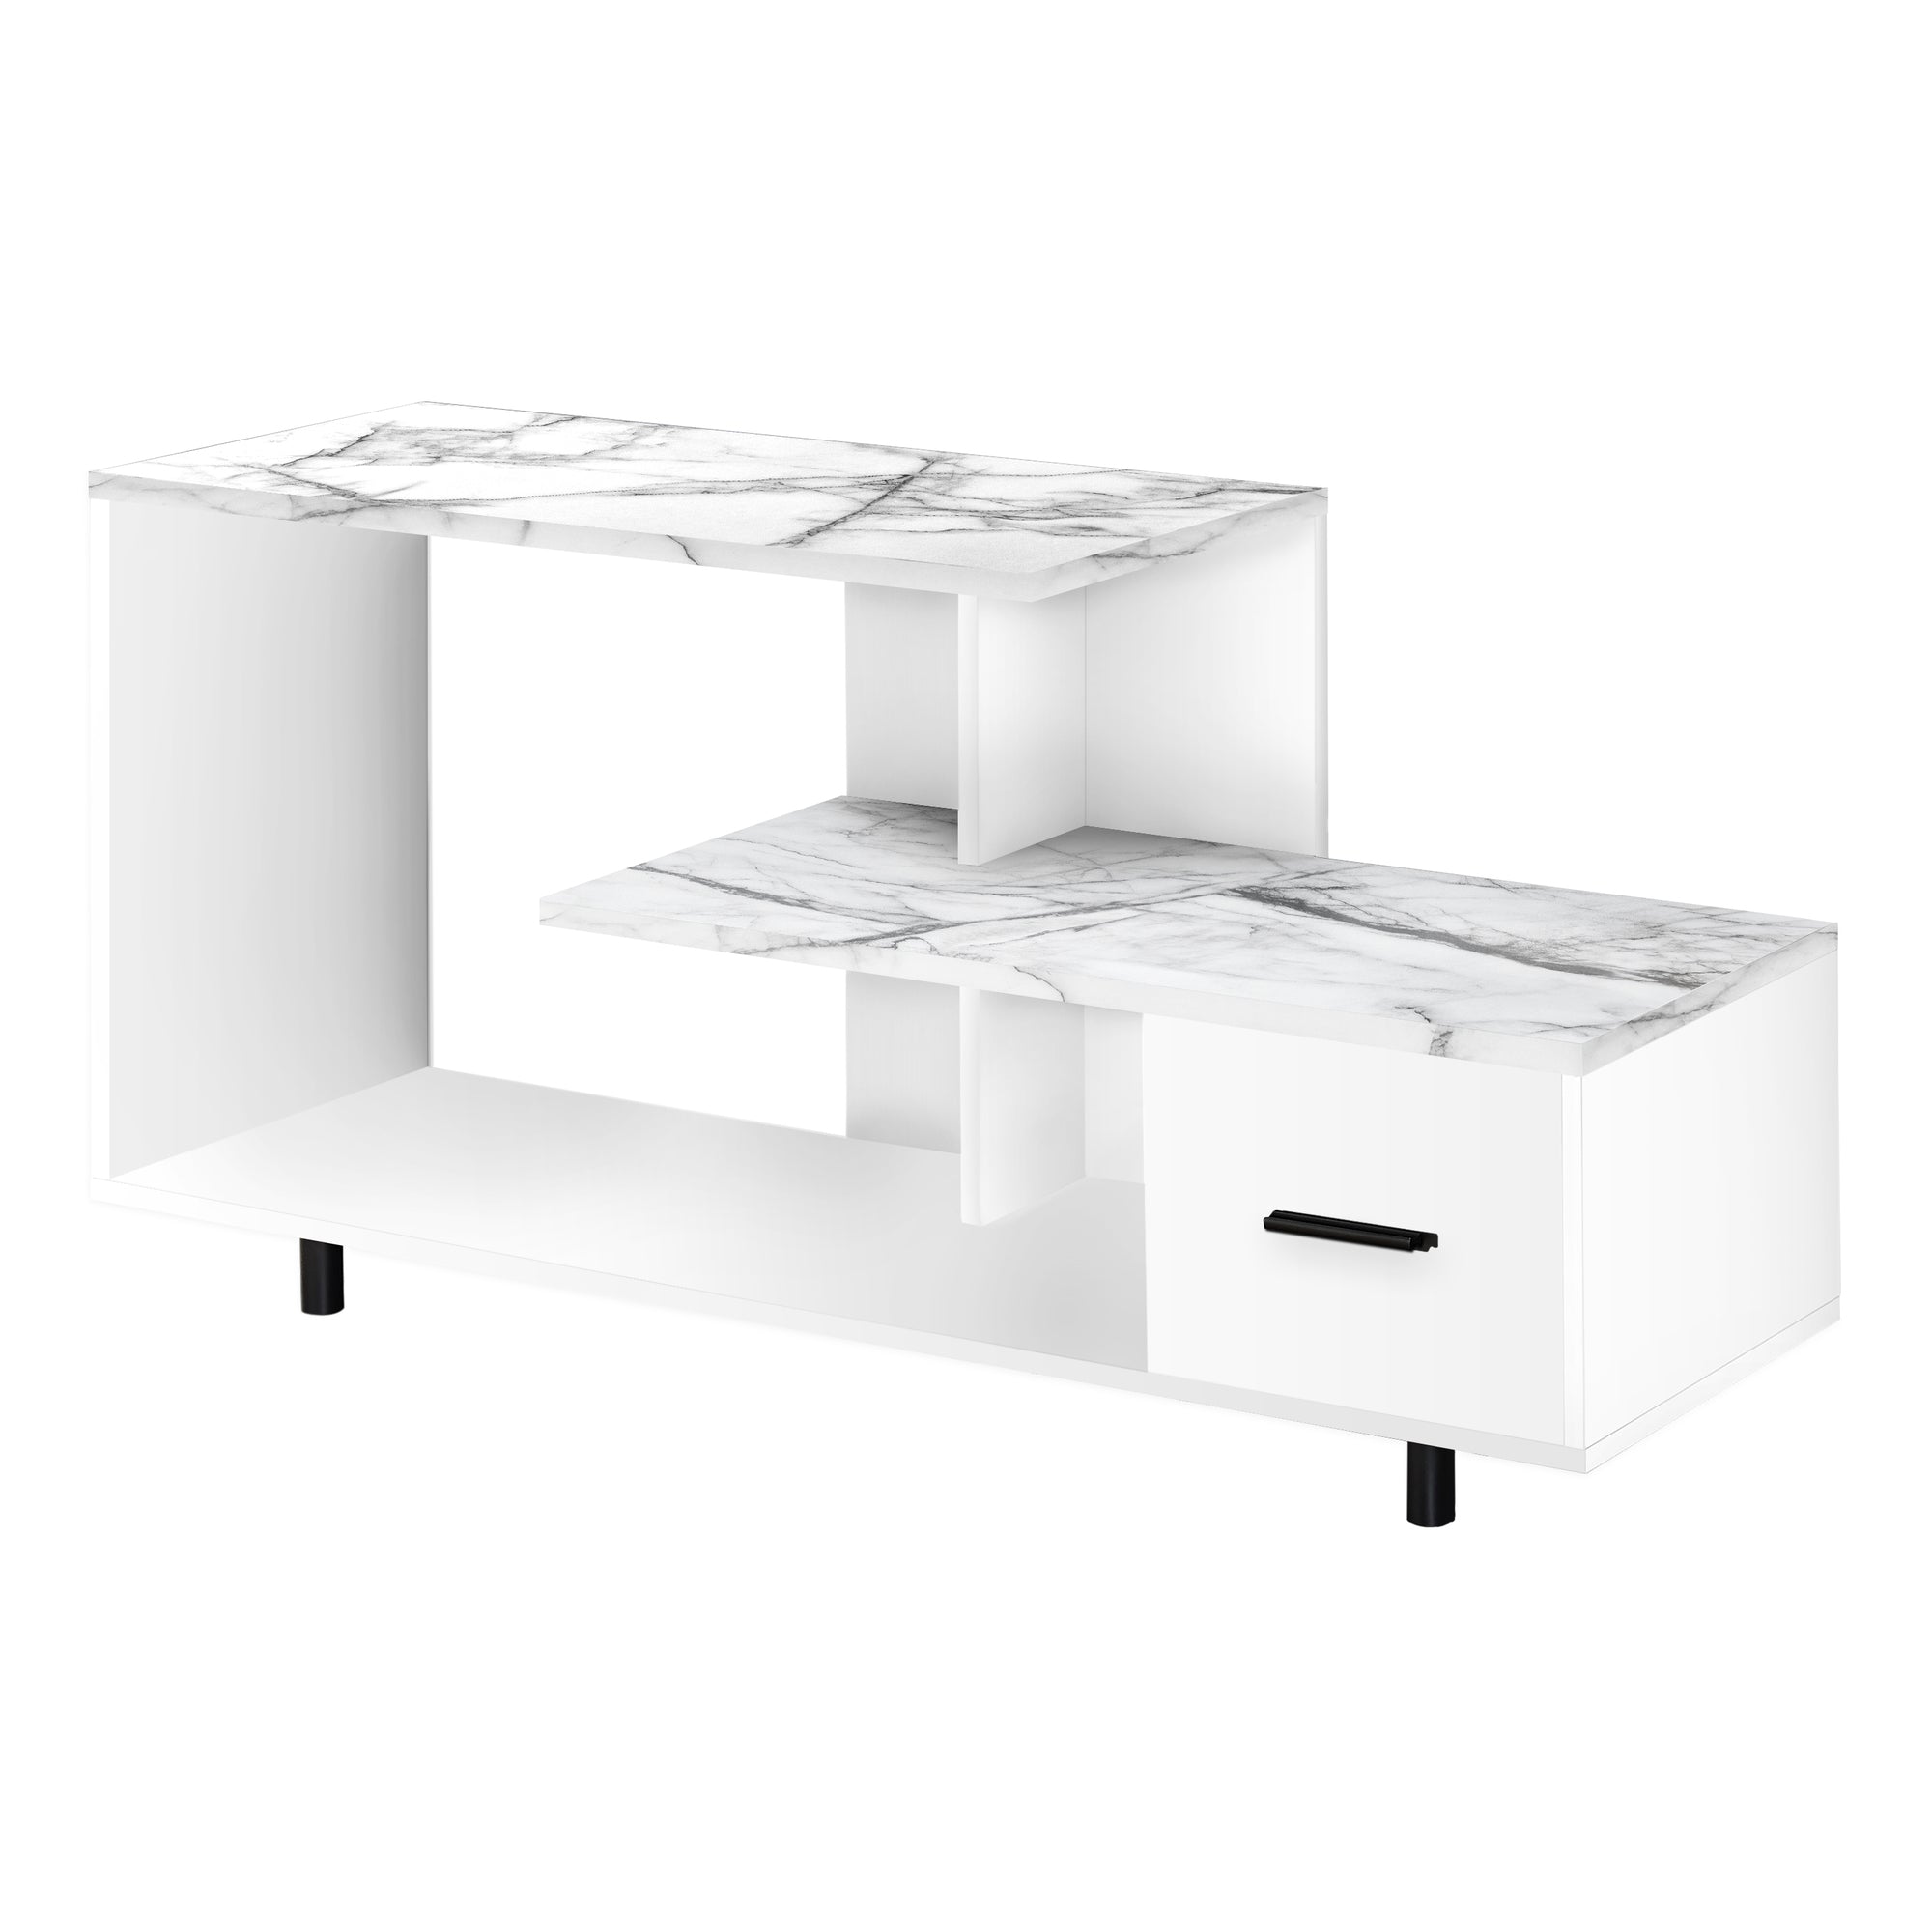 MN-792609    Tv Stand - 1 Storage Drawer / Open Shelves / Modern Style - 48"L - White Marble-Look  / Black